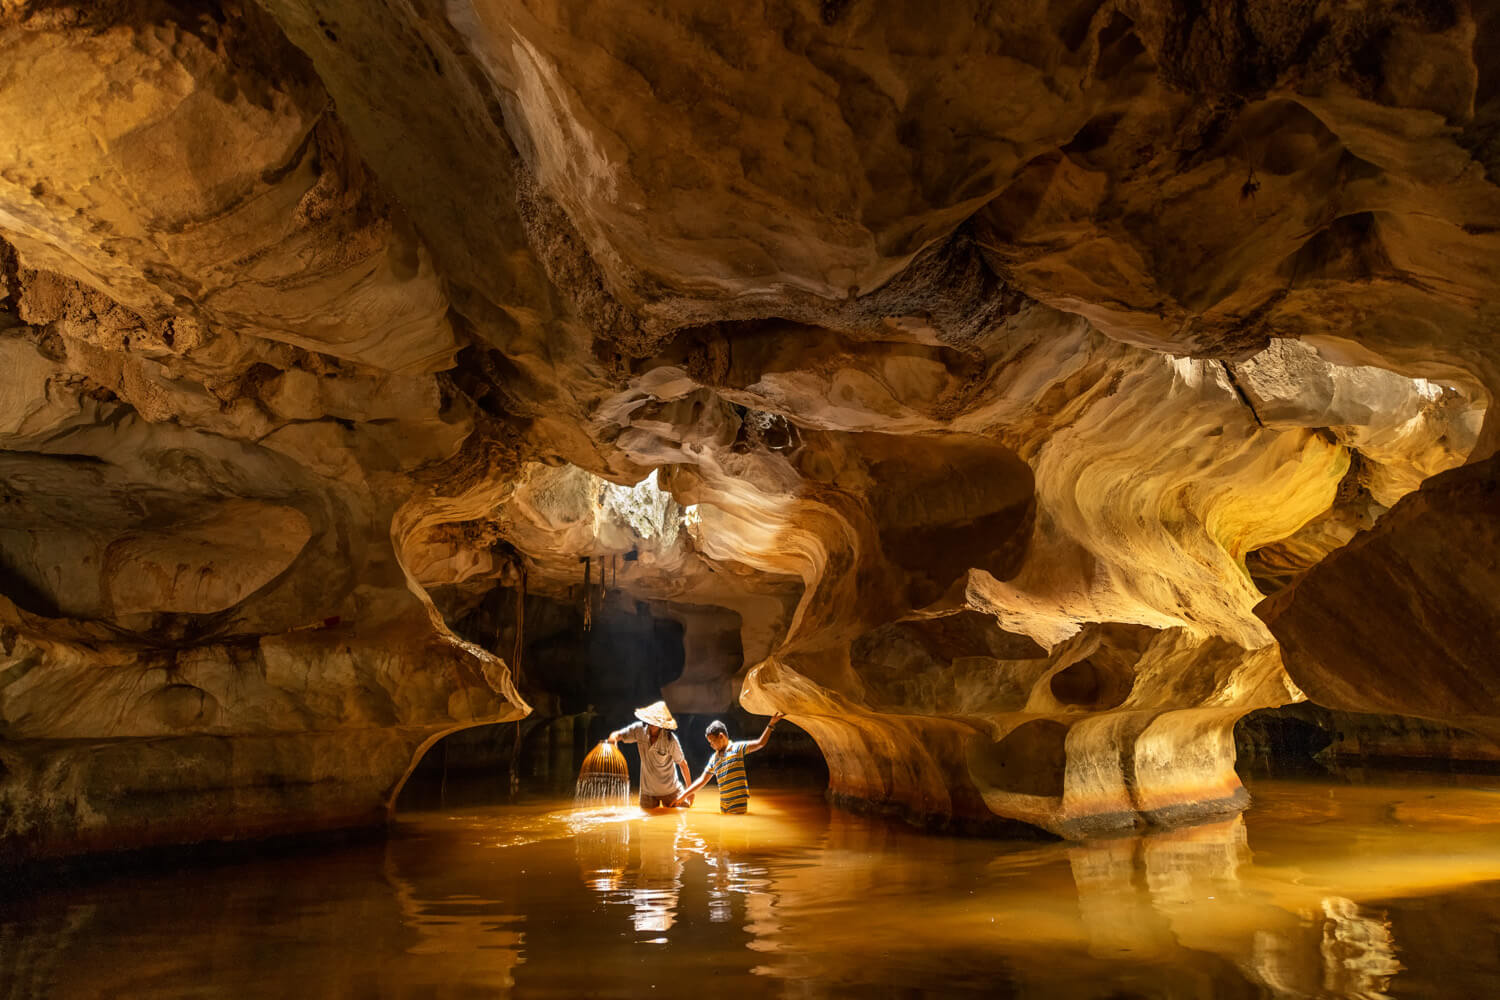 Two individuals stand in a shallow, water-filled cave, illuminated by a warm light that highlights the swirling patterns of the rock formation around them. One person holds a torch, causing sparks to reflect on the water's surface, adding a magical quality to the subterranean scene.